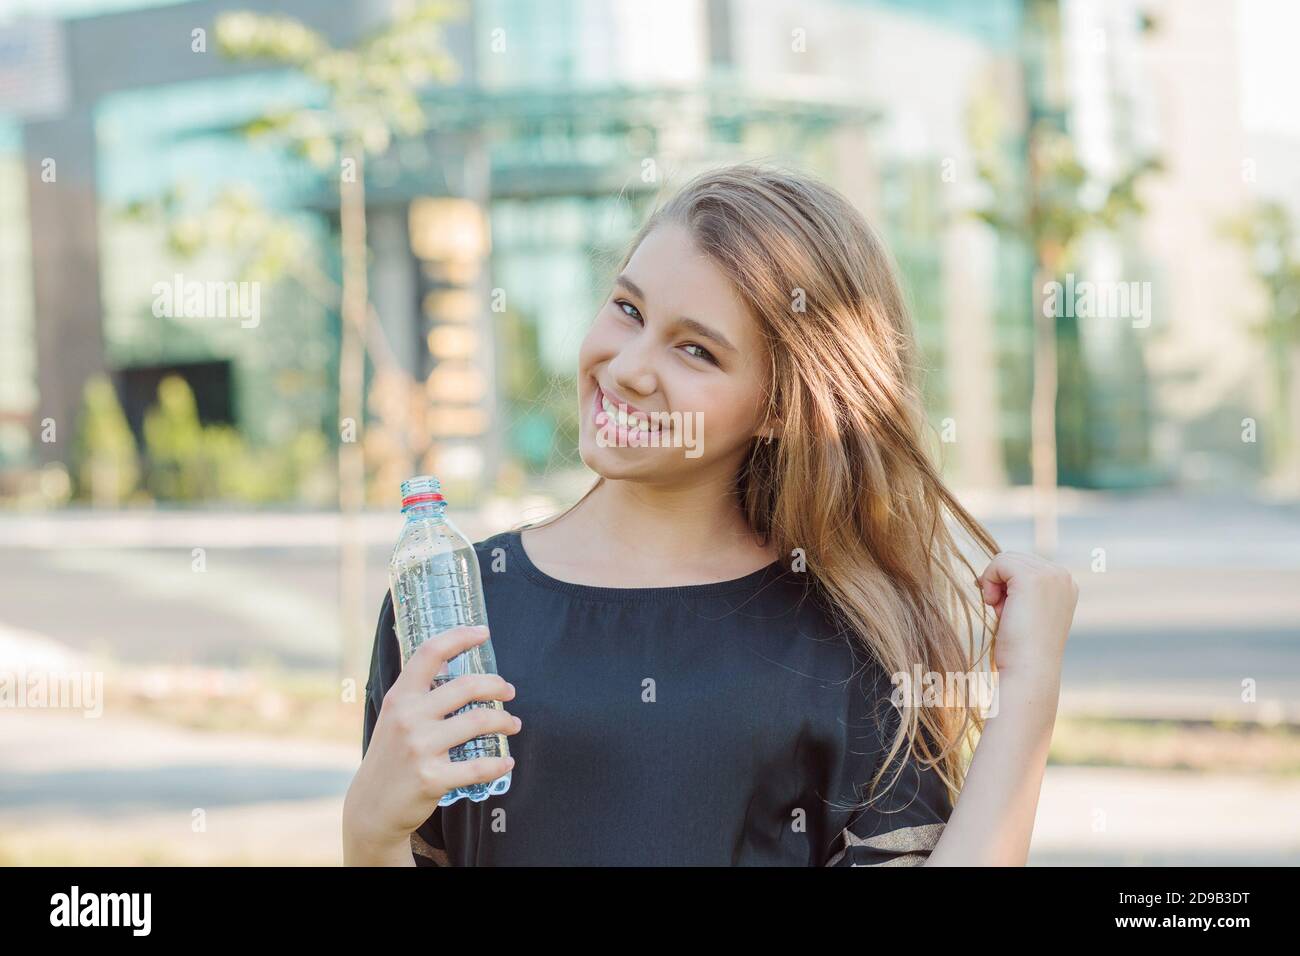 https://c8.alamy.com/comp/2D9B3DT/thirsty-cute-teenager-holding-a-bottle-of-water-in-the-city-smiling-teen-girl-woman-laughing-happy-about-to-drink-water-posing-touching-hair-city-2D9B3DT.jpg